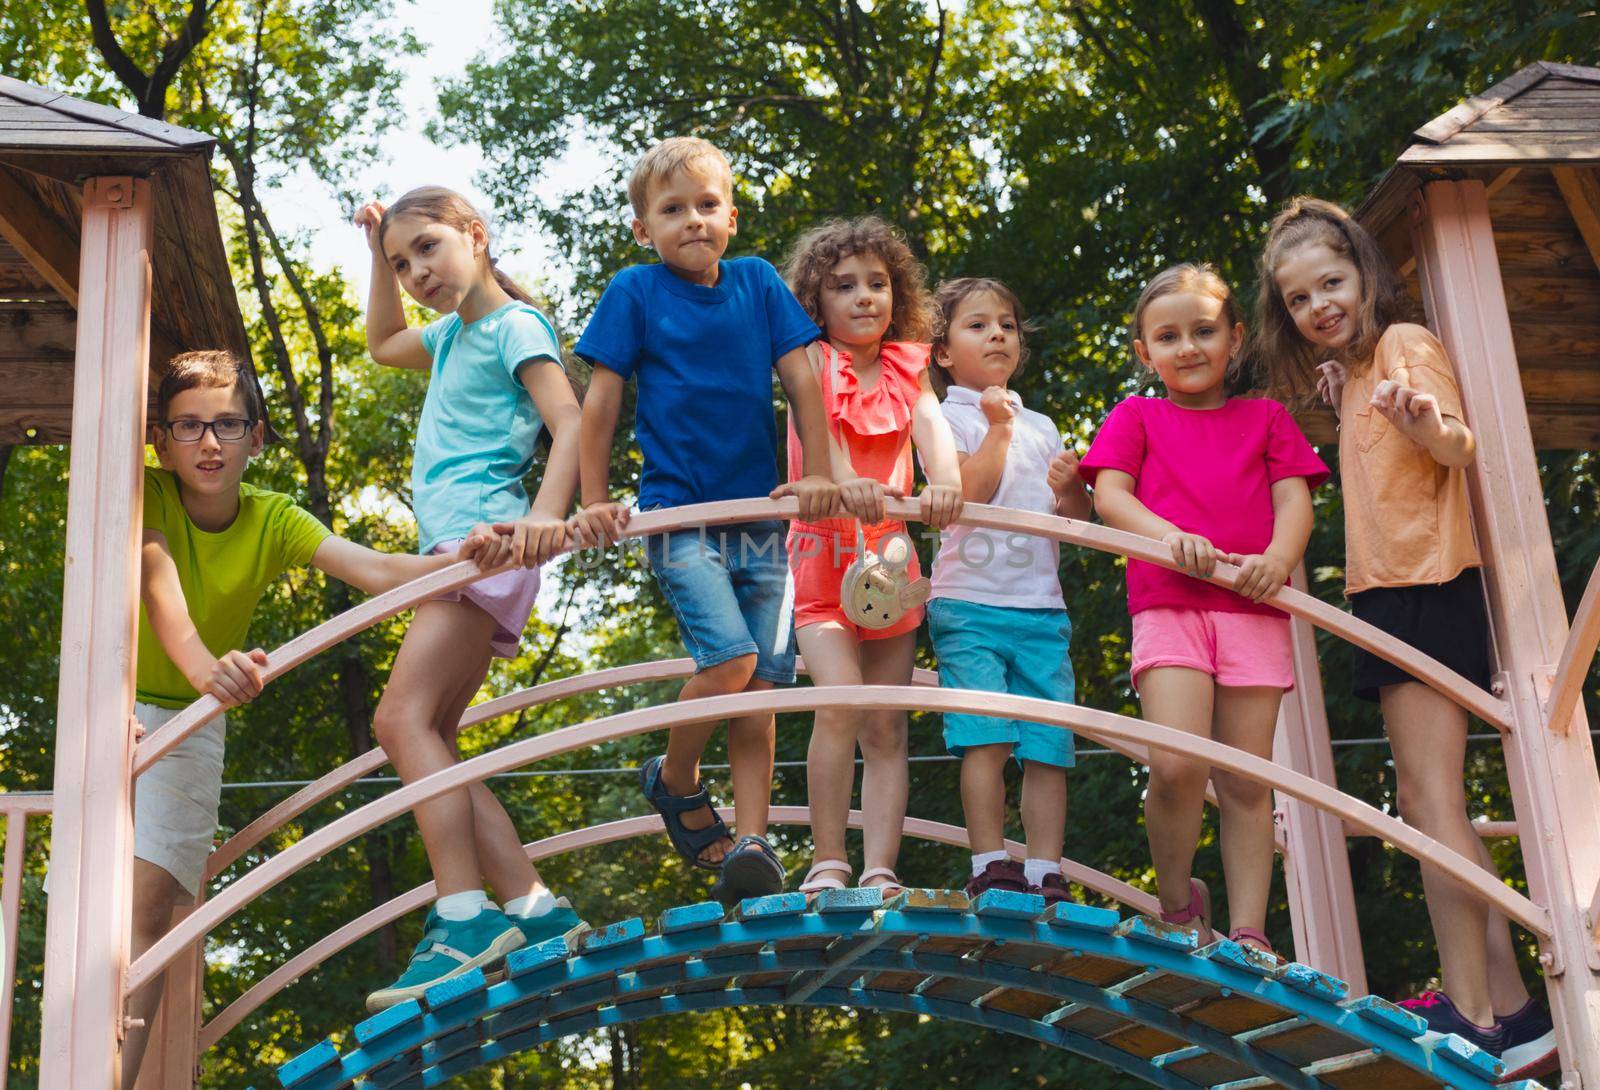 The elementary school children stand on a bridge in the playground and hold on to the railing. The kids dressed in colorful clothes are posing for the camera